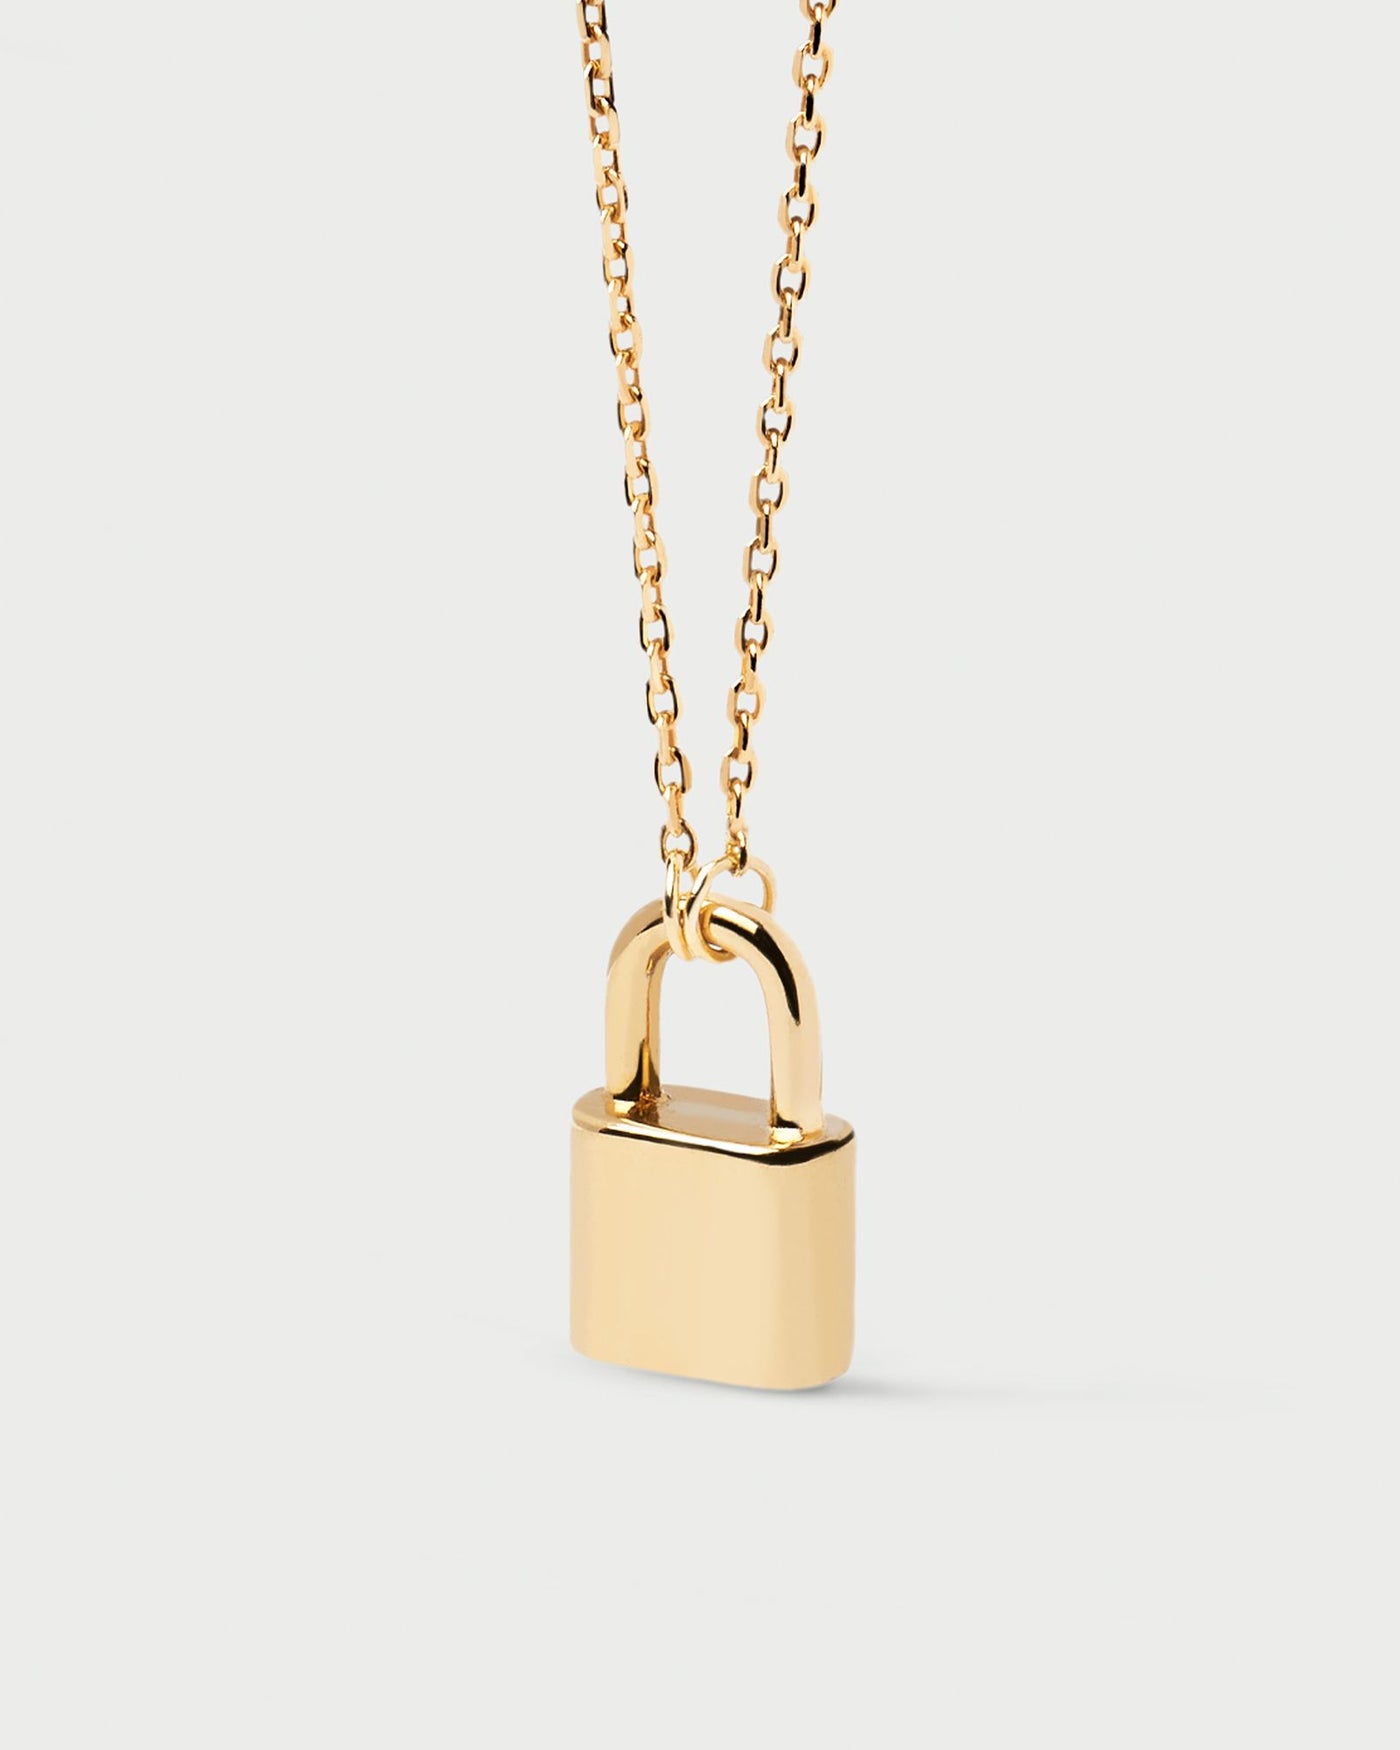 2024 Selection | Bond Necklace. Gold-plated silver necklace with padlock pendant to personalize. Get the latest arrival from PDPAOLA. Place your order safely and get this Best Seller. Free Shipping.